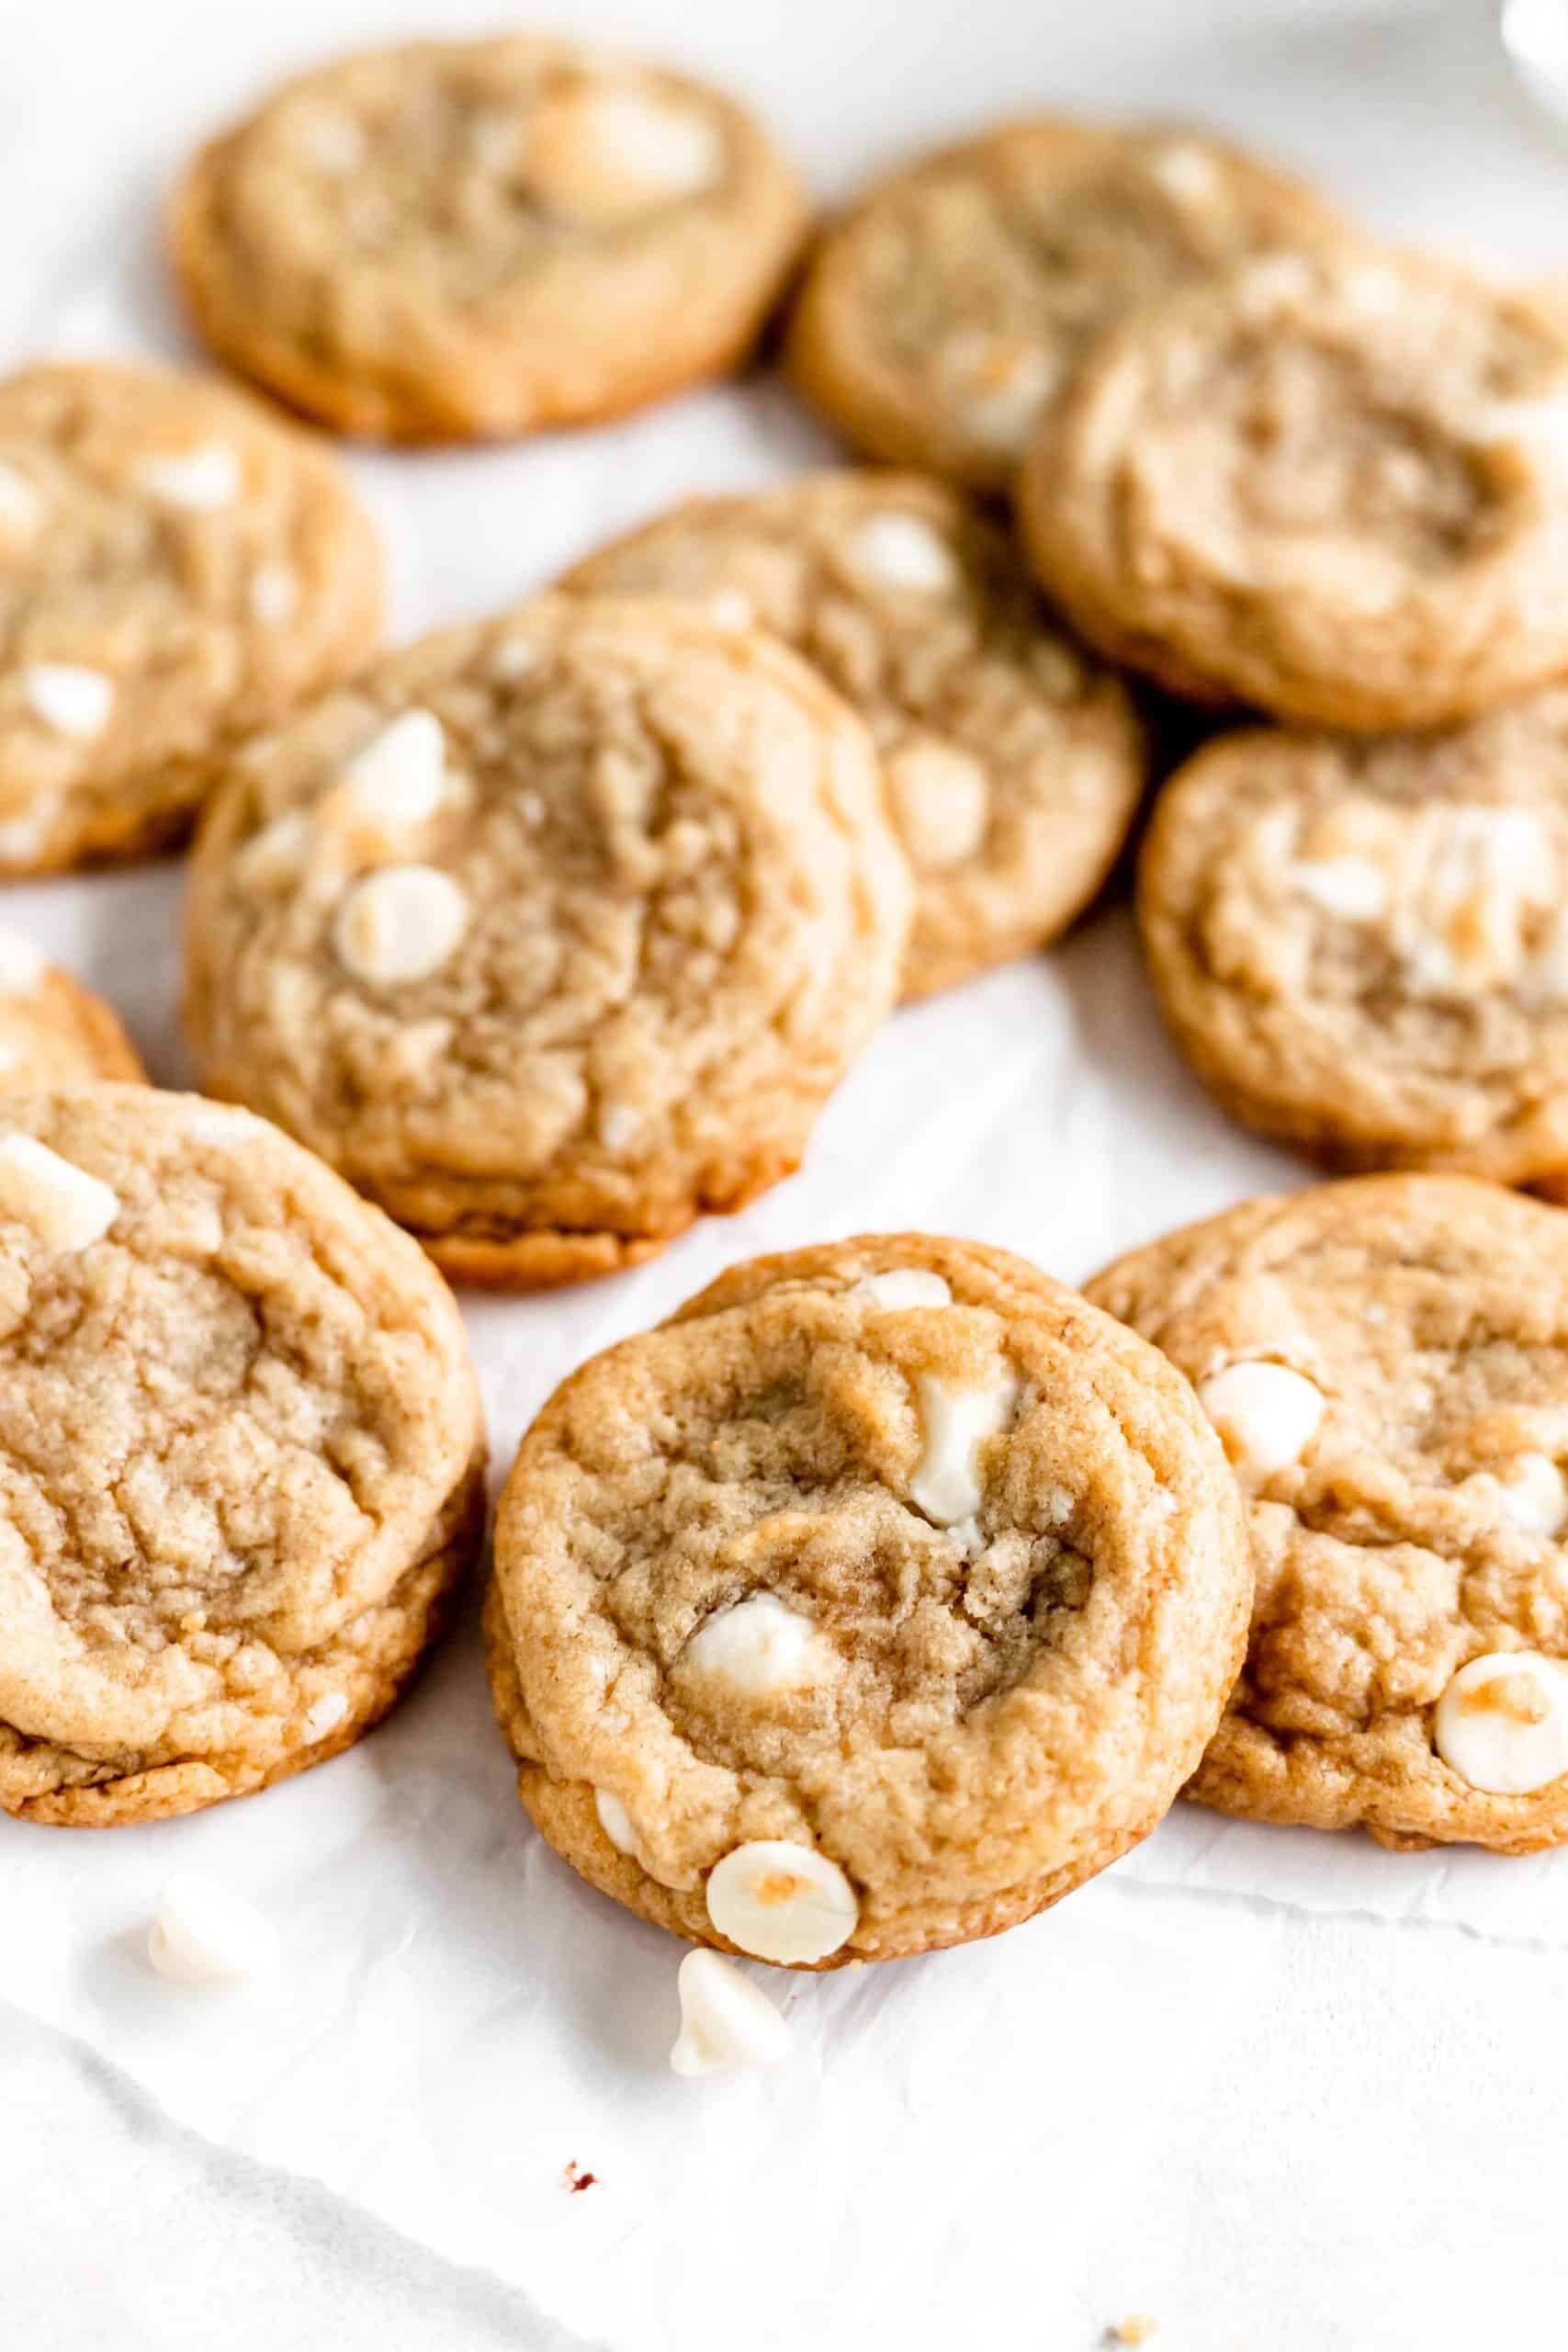 Brown-Butter-Banana-White-Chocolate-Chip-Cookies-35-scaled.jpg